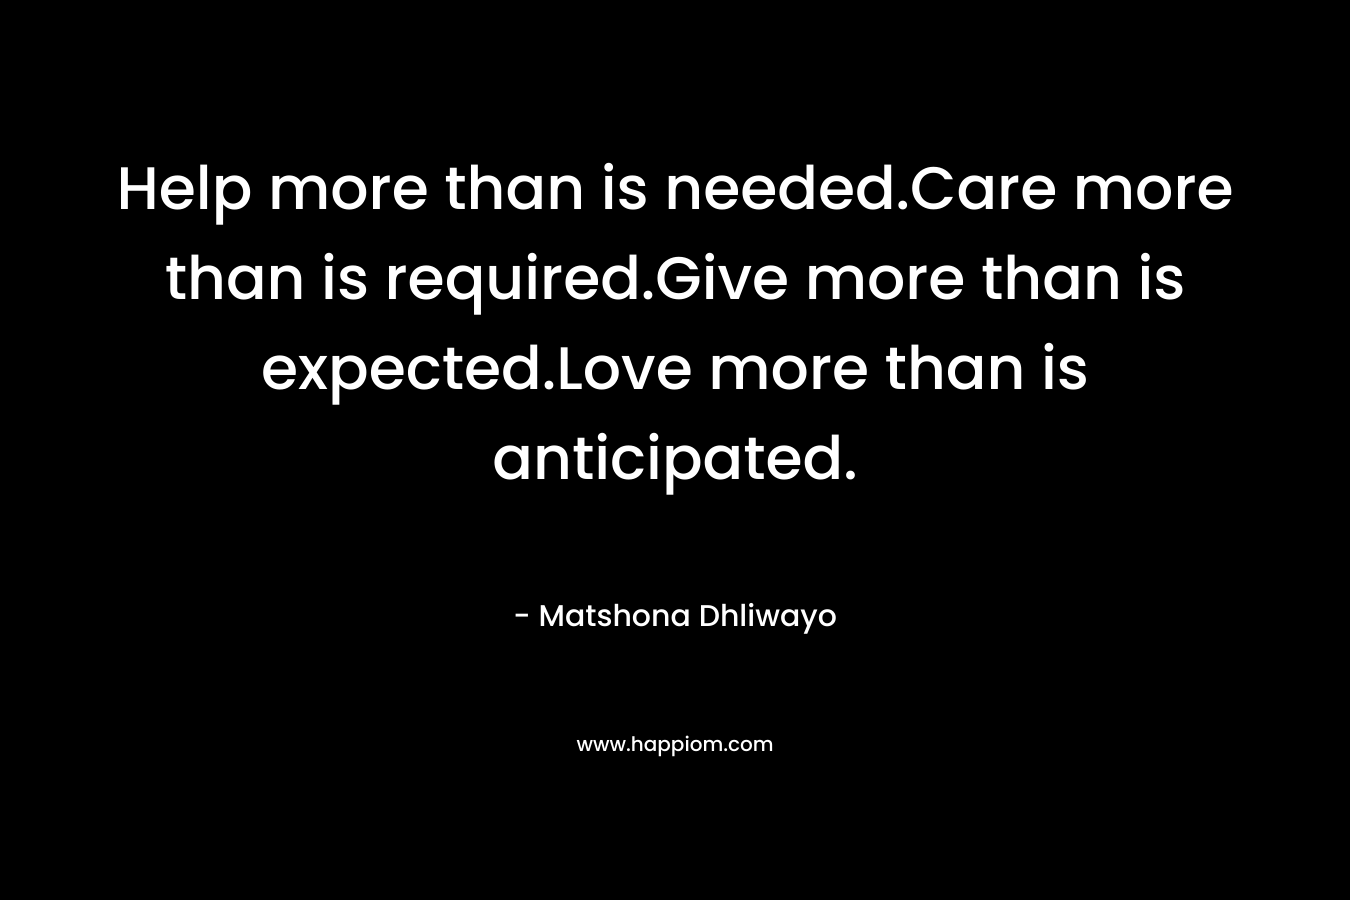 Help more than is needed.Care more than is required.Give more than is expected.Love more than is anticipated.